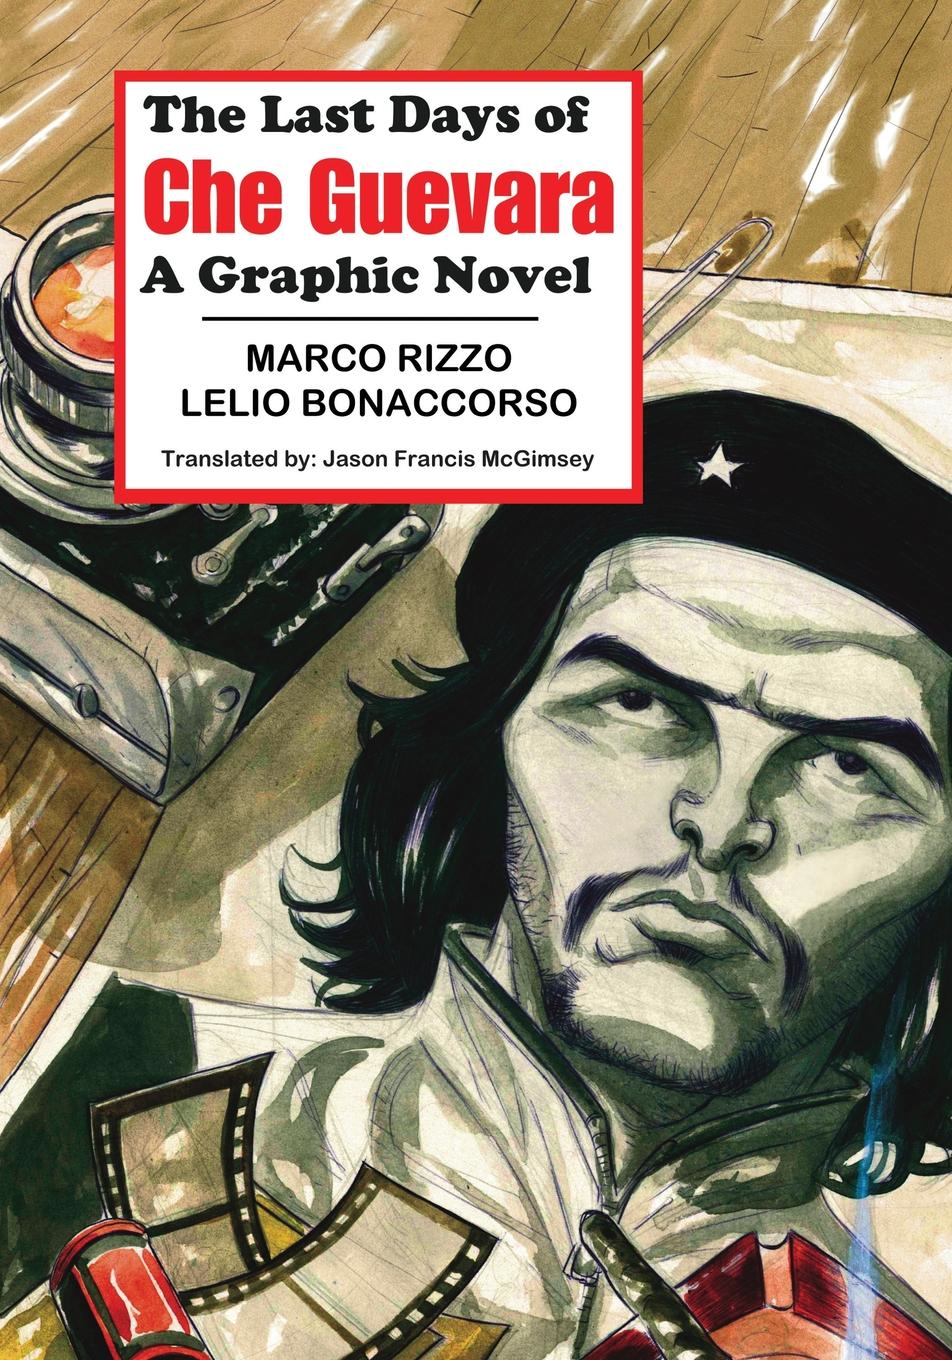 Che Guevara In Popular Culture: Most Up-to-Date Encyclopedia, News